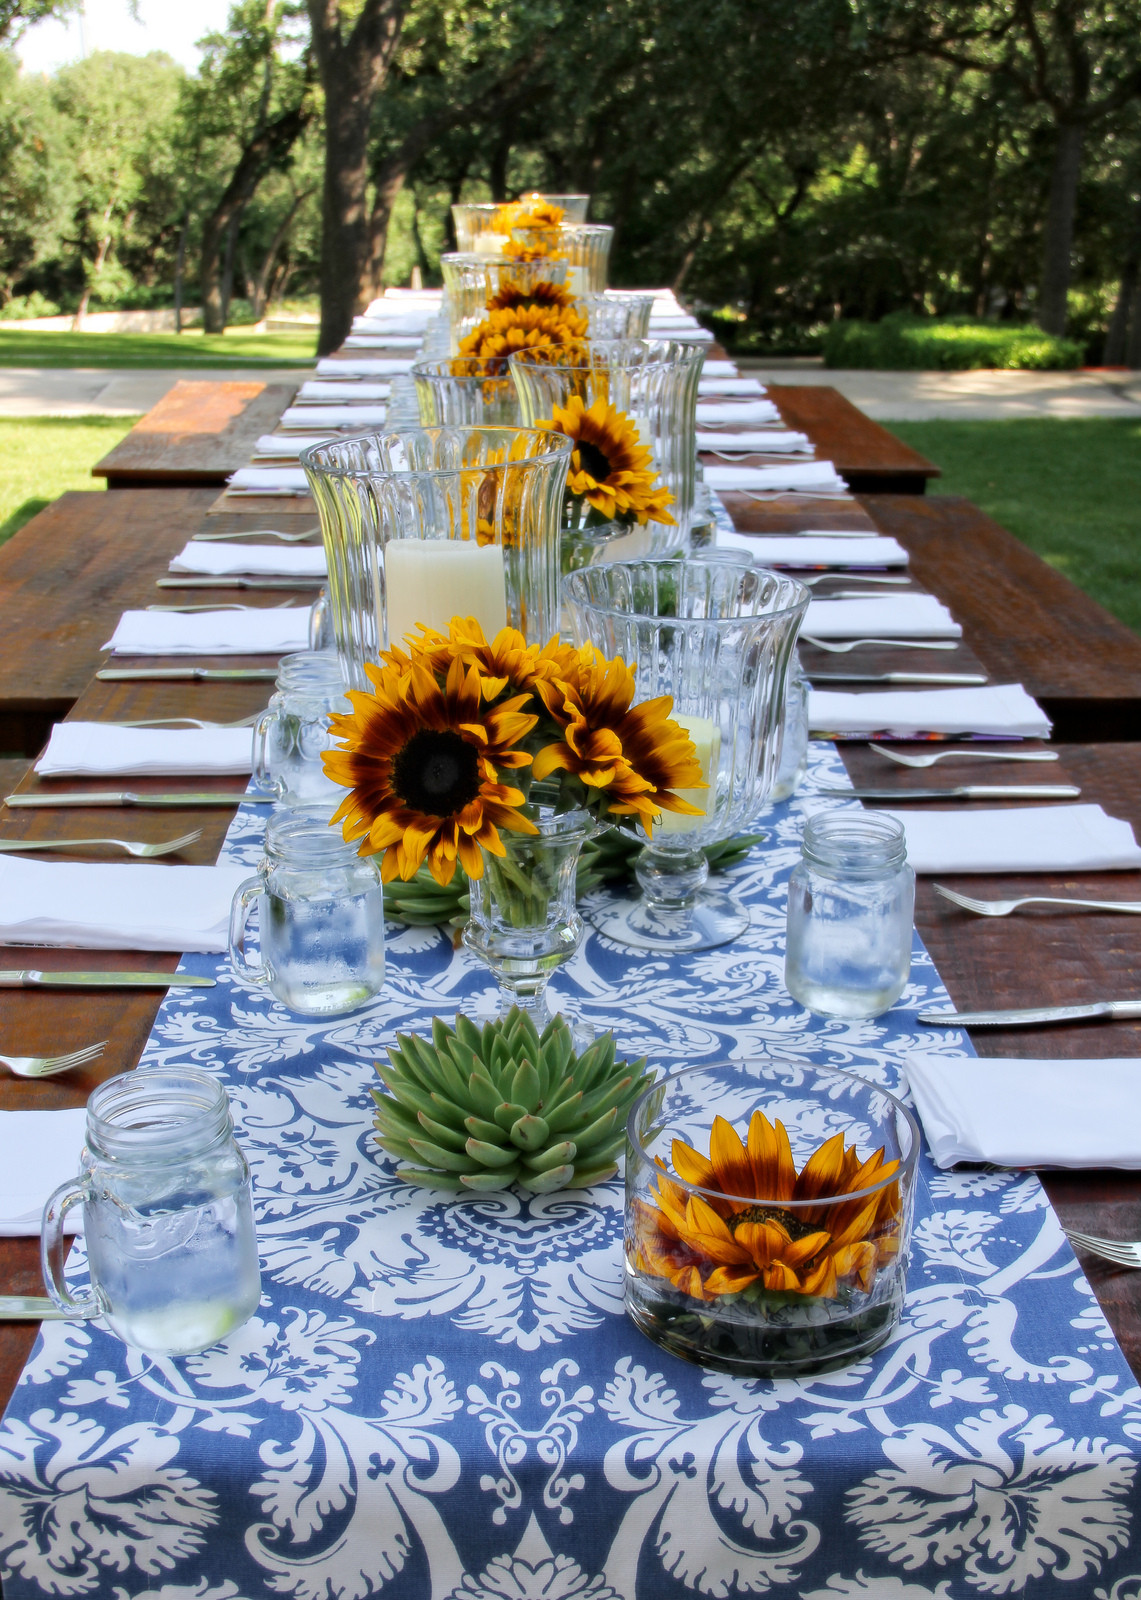 Backyard Summer Party Ideas
 50 Outdoor Party Ideas You Should Try Out This Summer